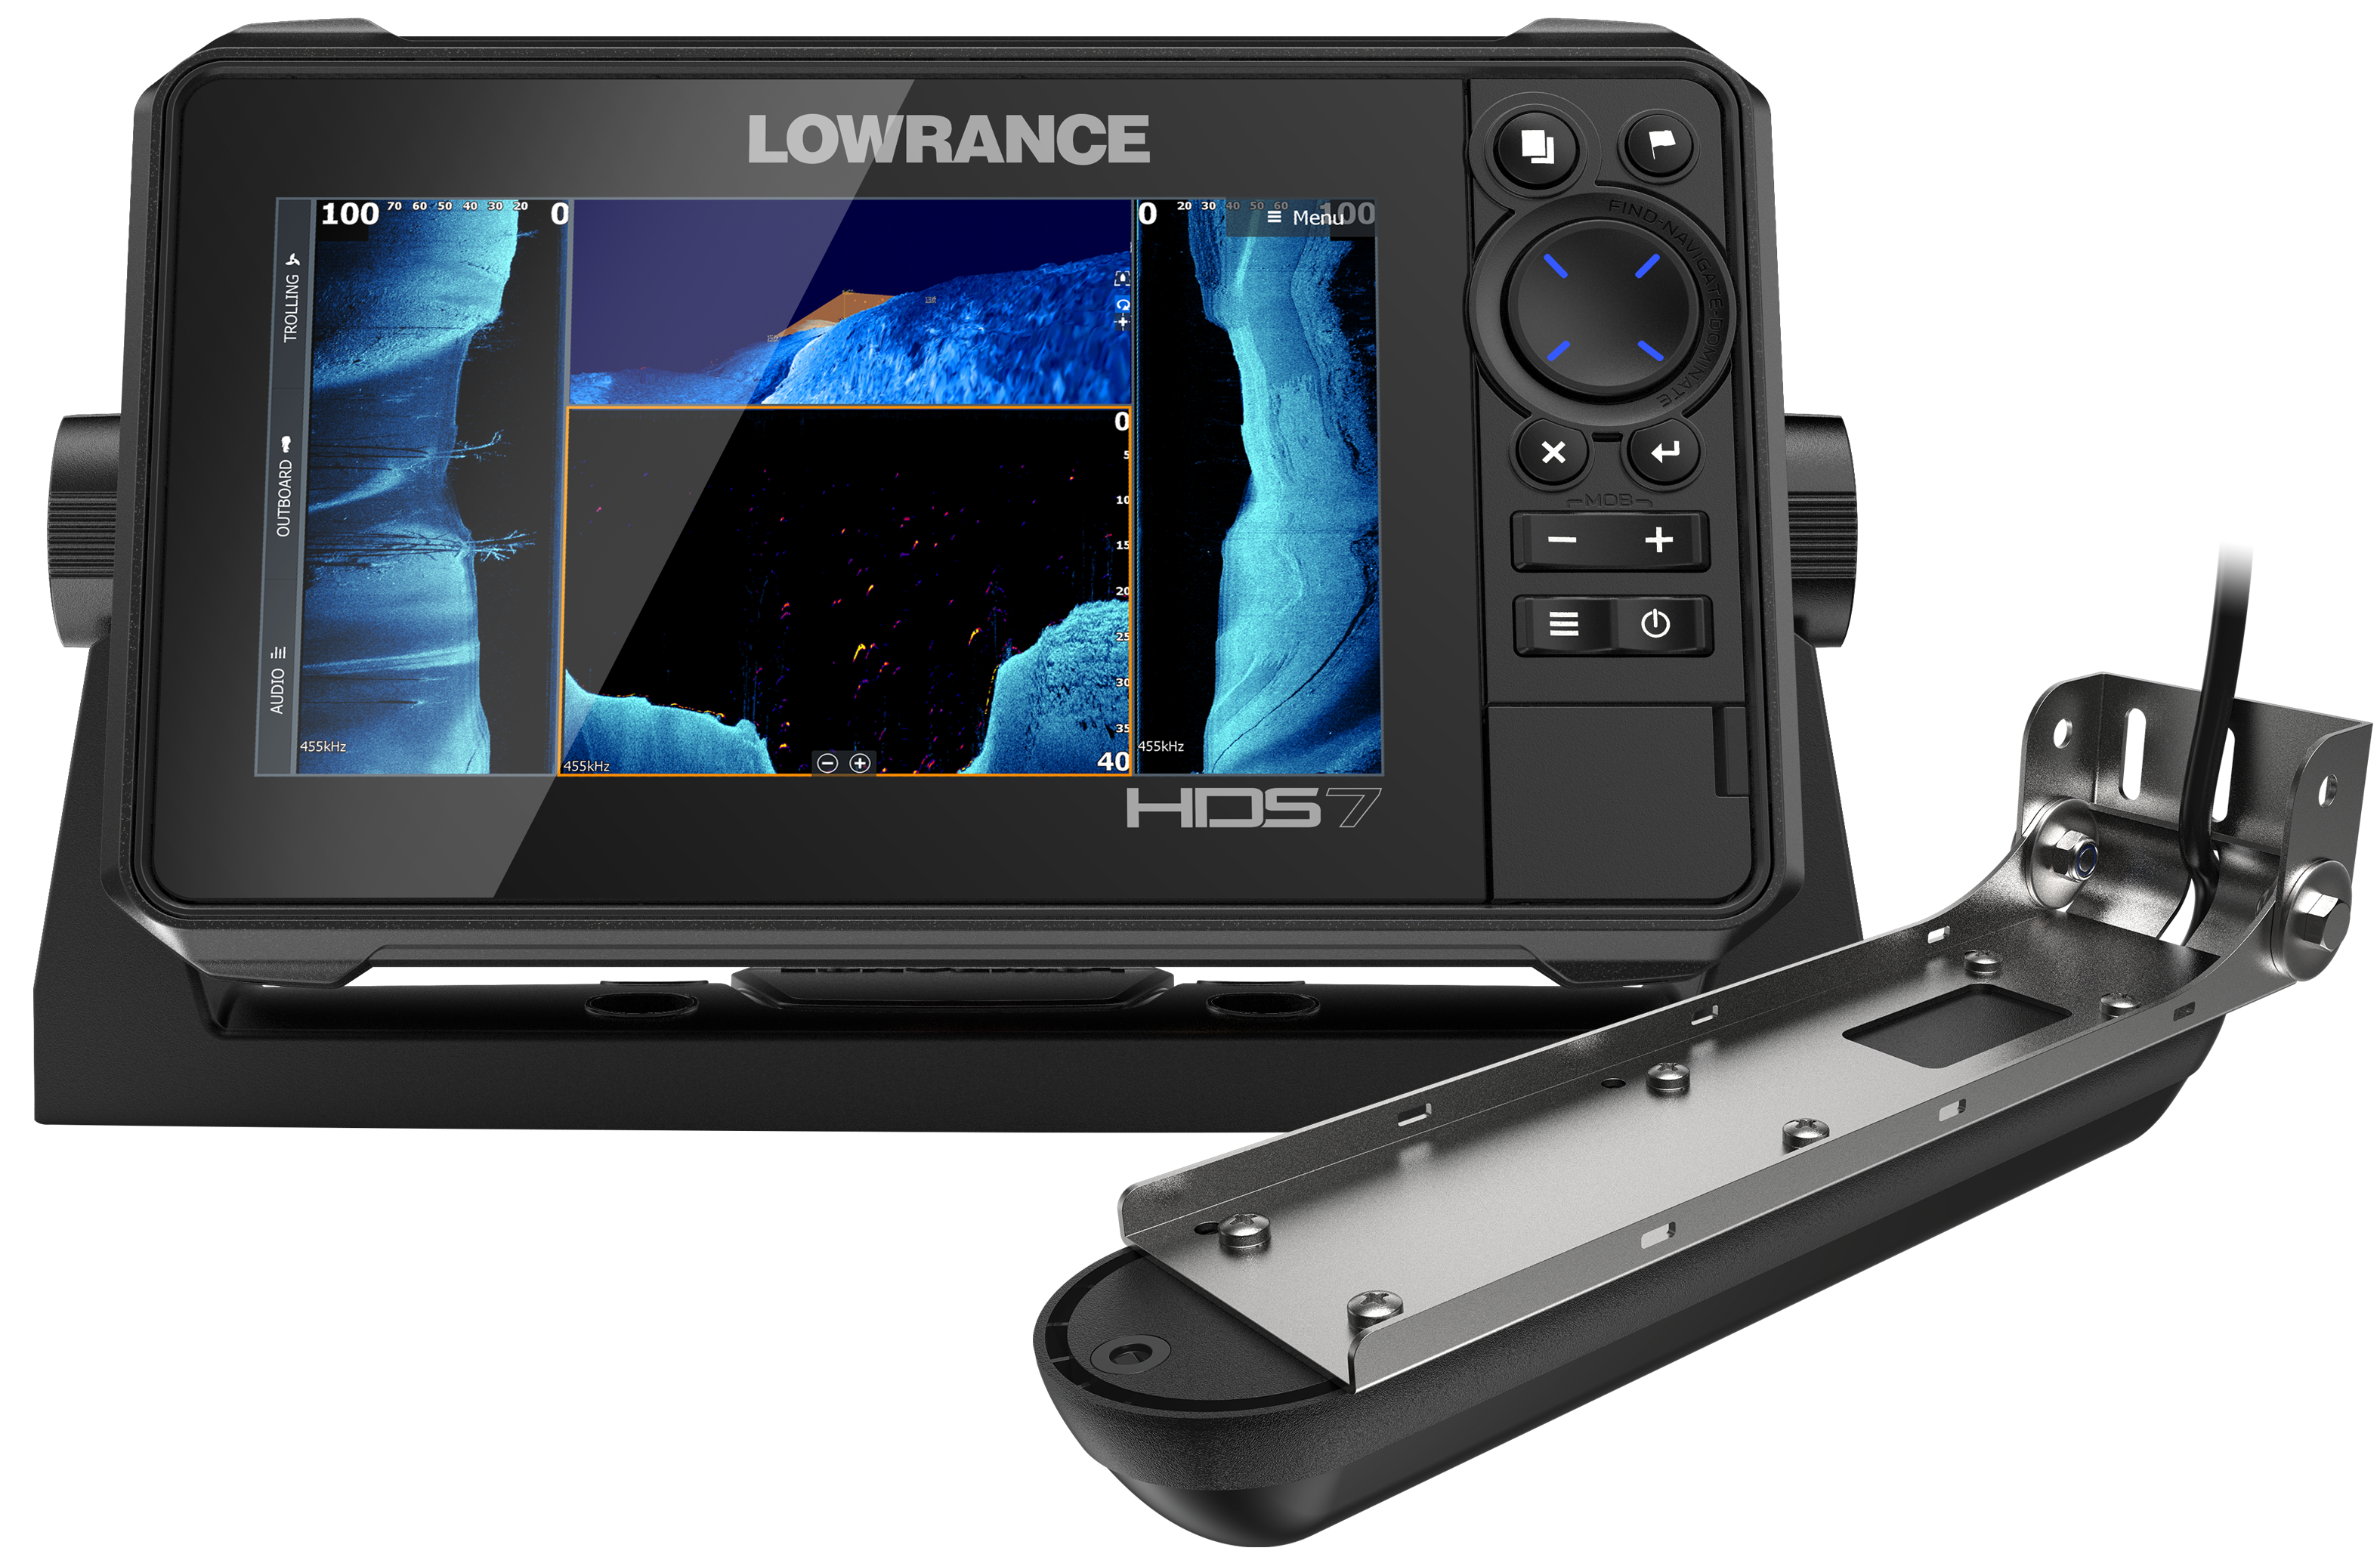 HDS-7 Live - 7-inch Fish Finder with Active Imaging 3 in 1 Transducer with Active Imaging Sonar FishReveal Fish Targeting and Smartphone Integration. Preloaded C-MAP US Enhanced Mapping - image 4 of 8